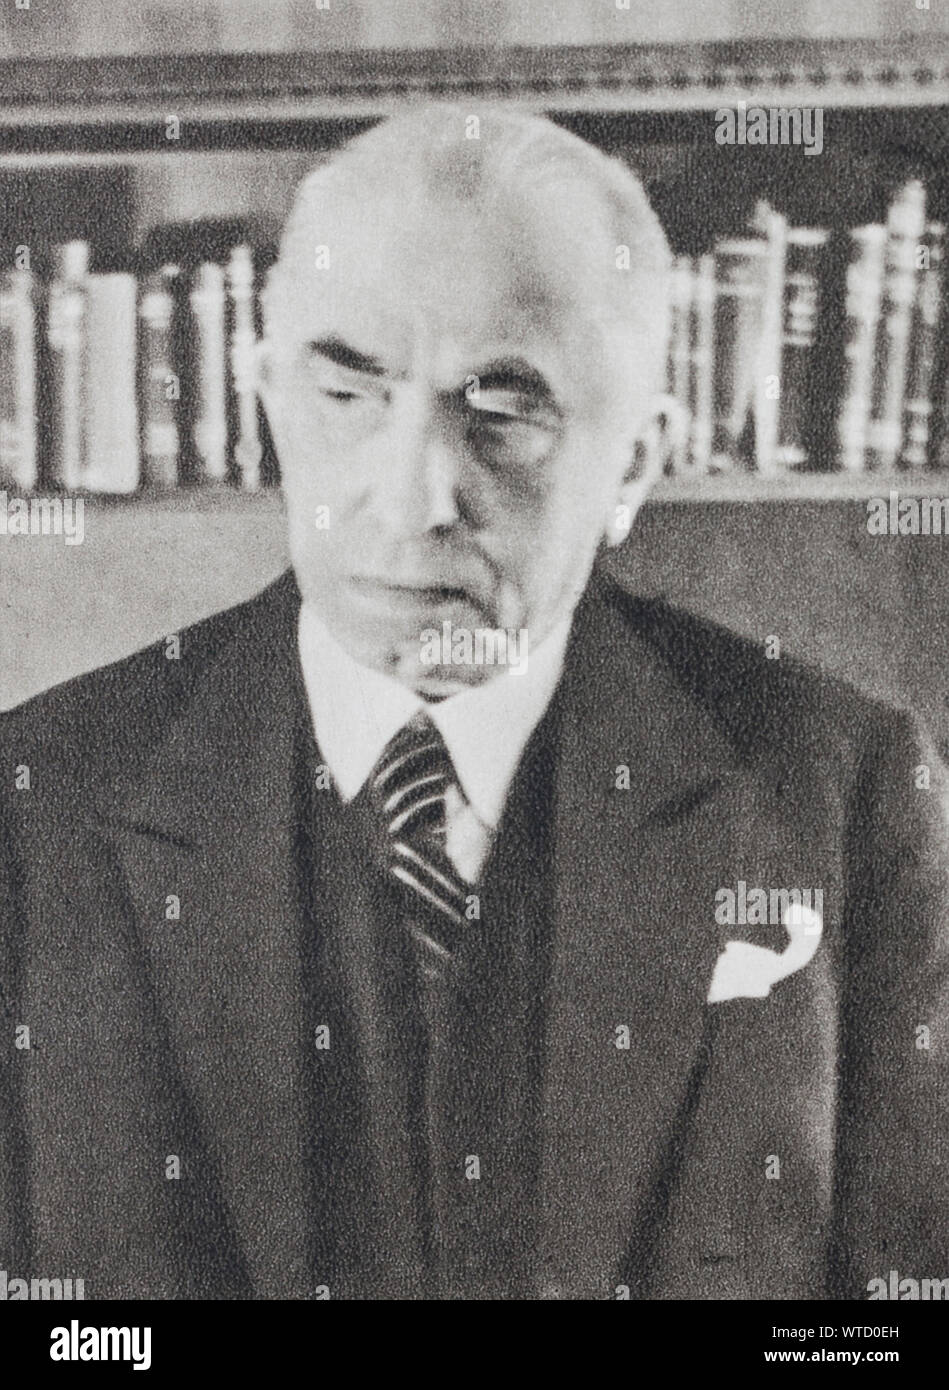 Emil Hacha (1872 – 1945) was a Czech lawyer, the third President of Czechoslovakia from 1938 to 1939. From March 1939, his country was under the contr Stock Photo